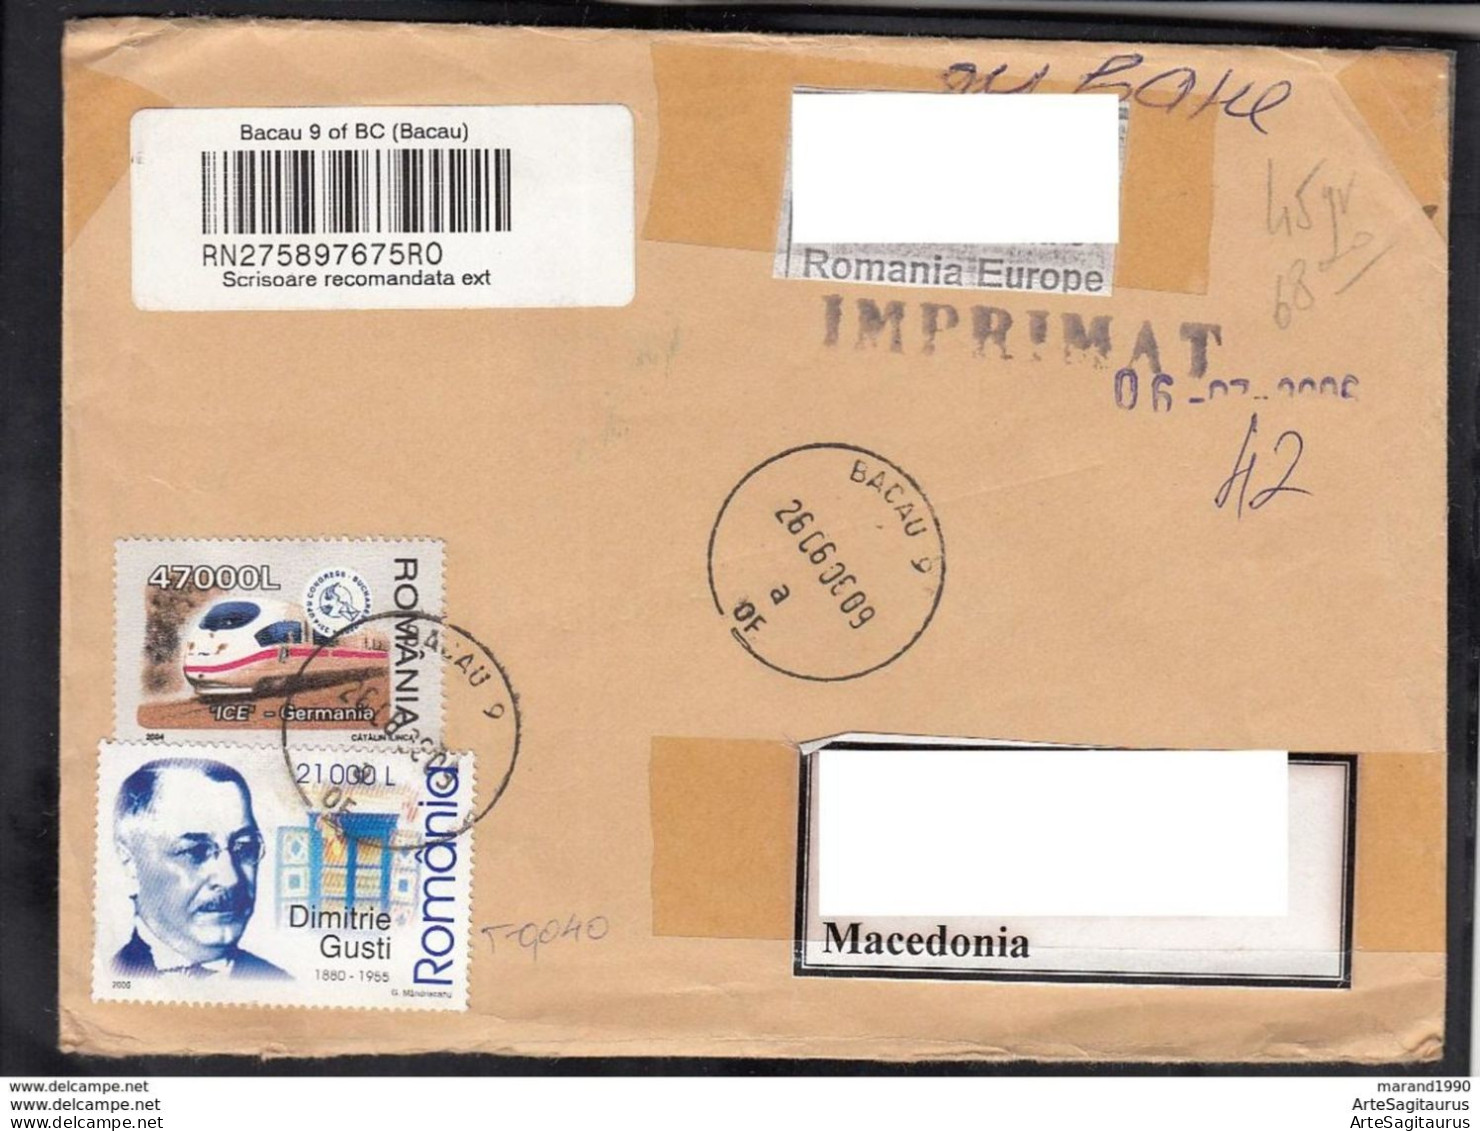 ROMANIA, R-COVER, TRAINS, DIMITRIE GUSTI, REPUBLIC OF MACEDONIA   (008) - Covers & Documents